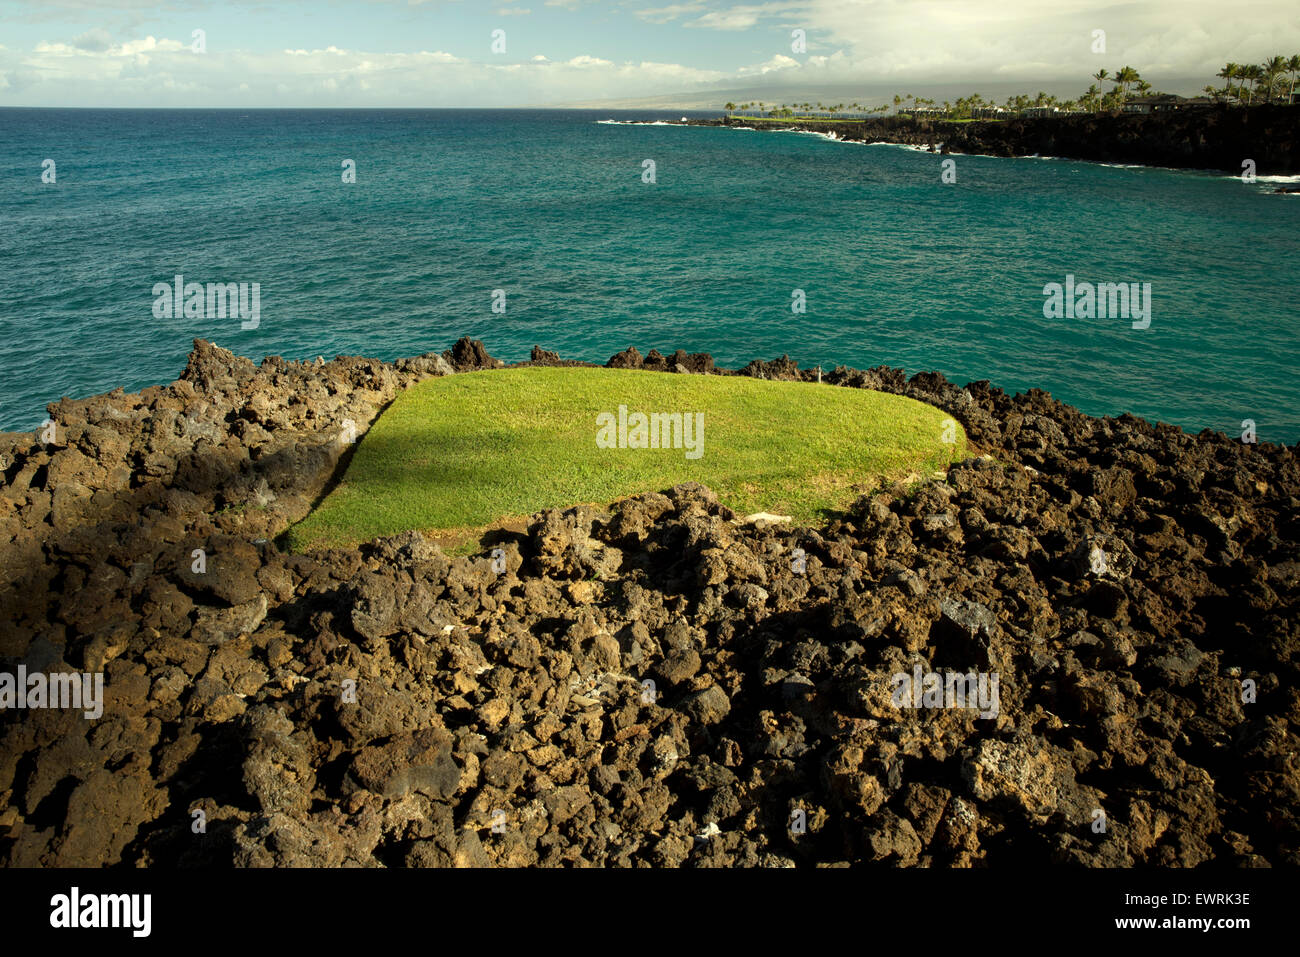 Small patch of lawn in lava rock. Hawaii, The Big Island. Stock Photo